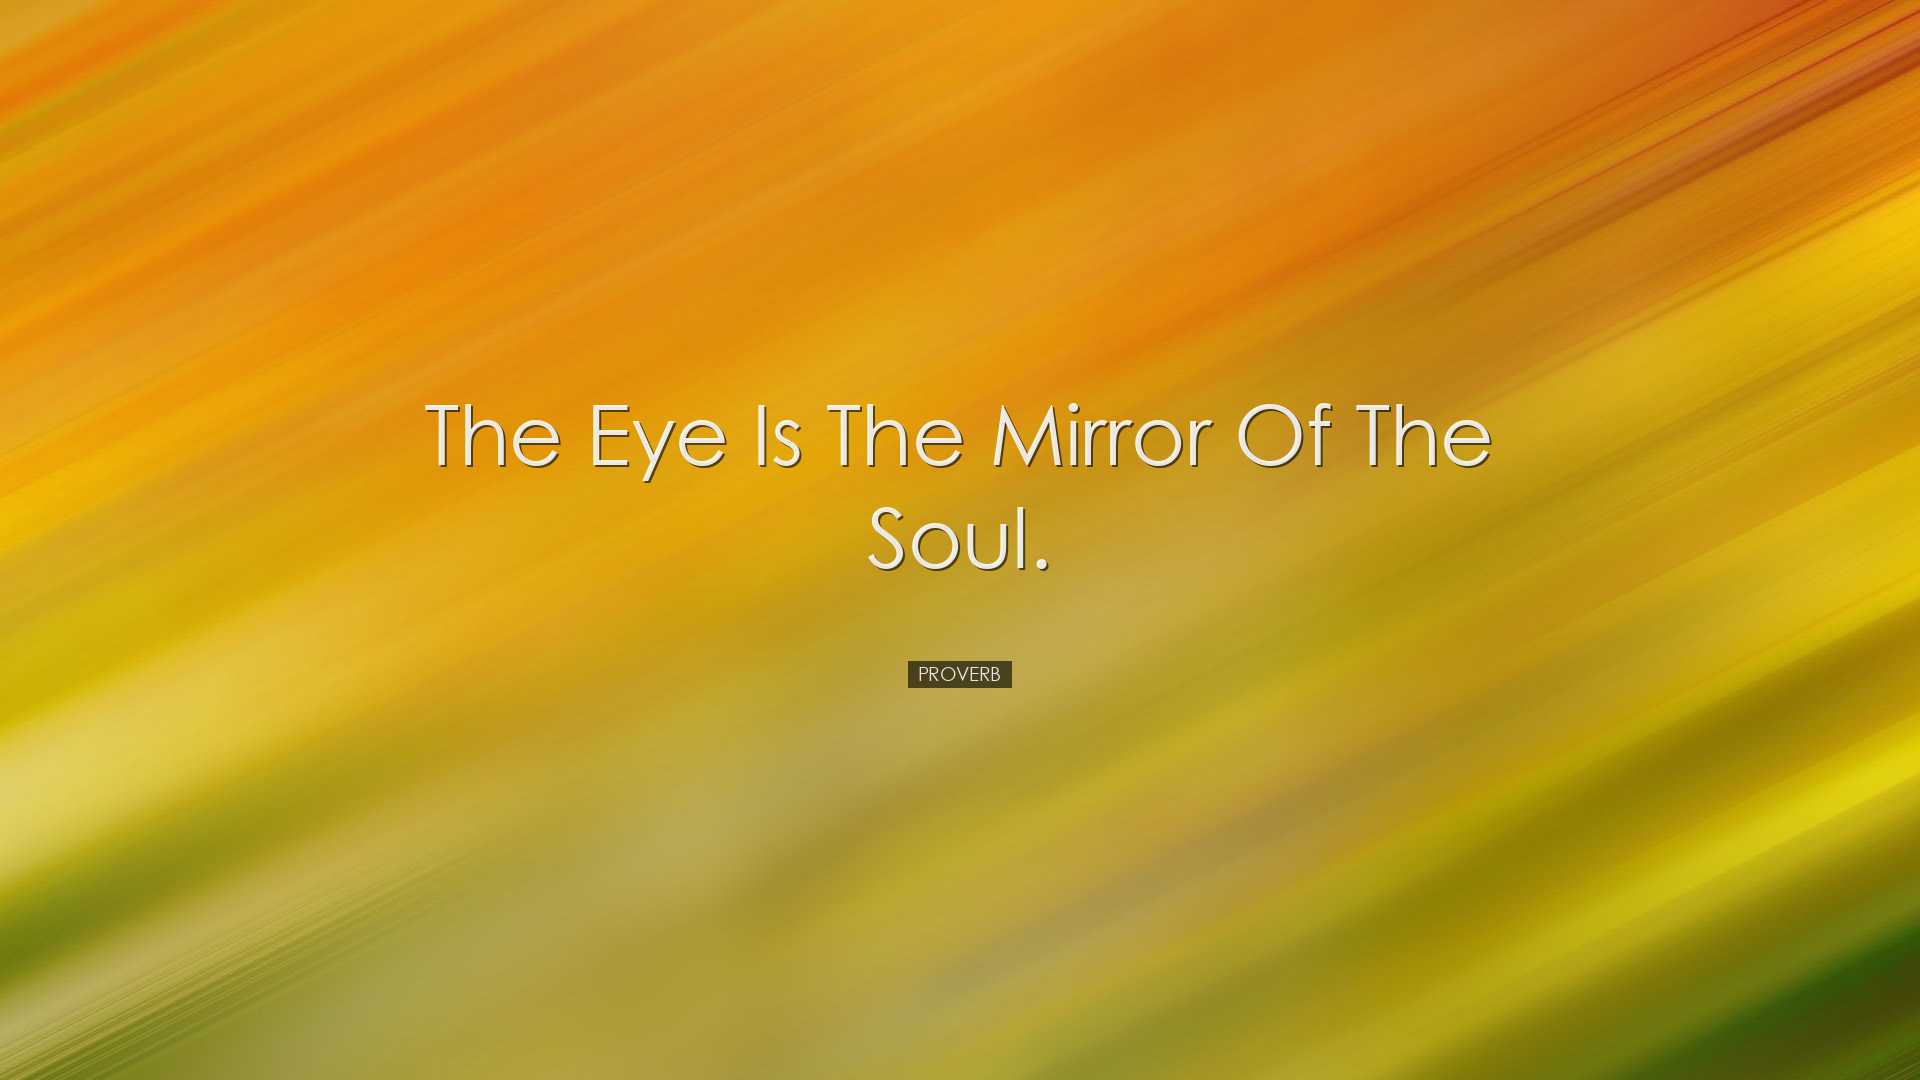 The eye is the mirror of the soul. - Proverb